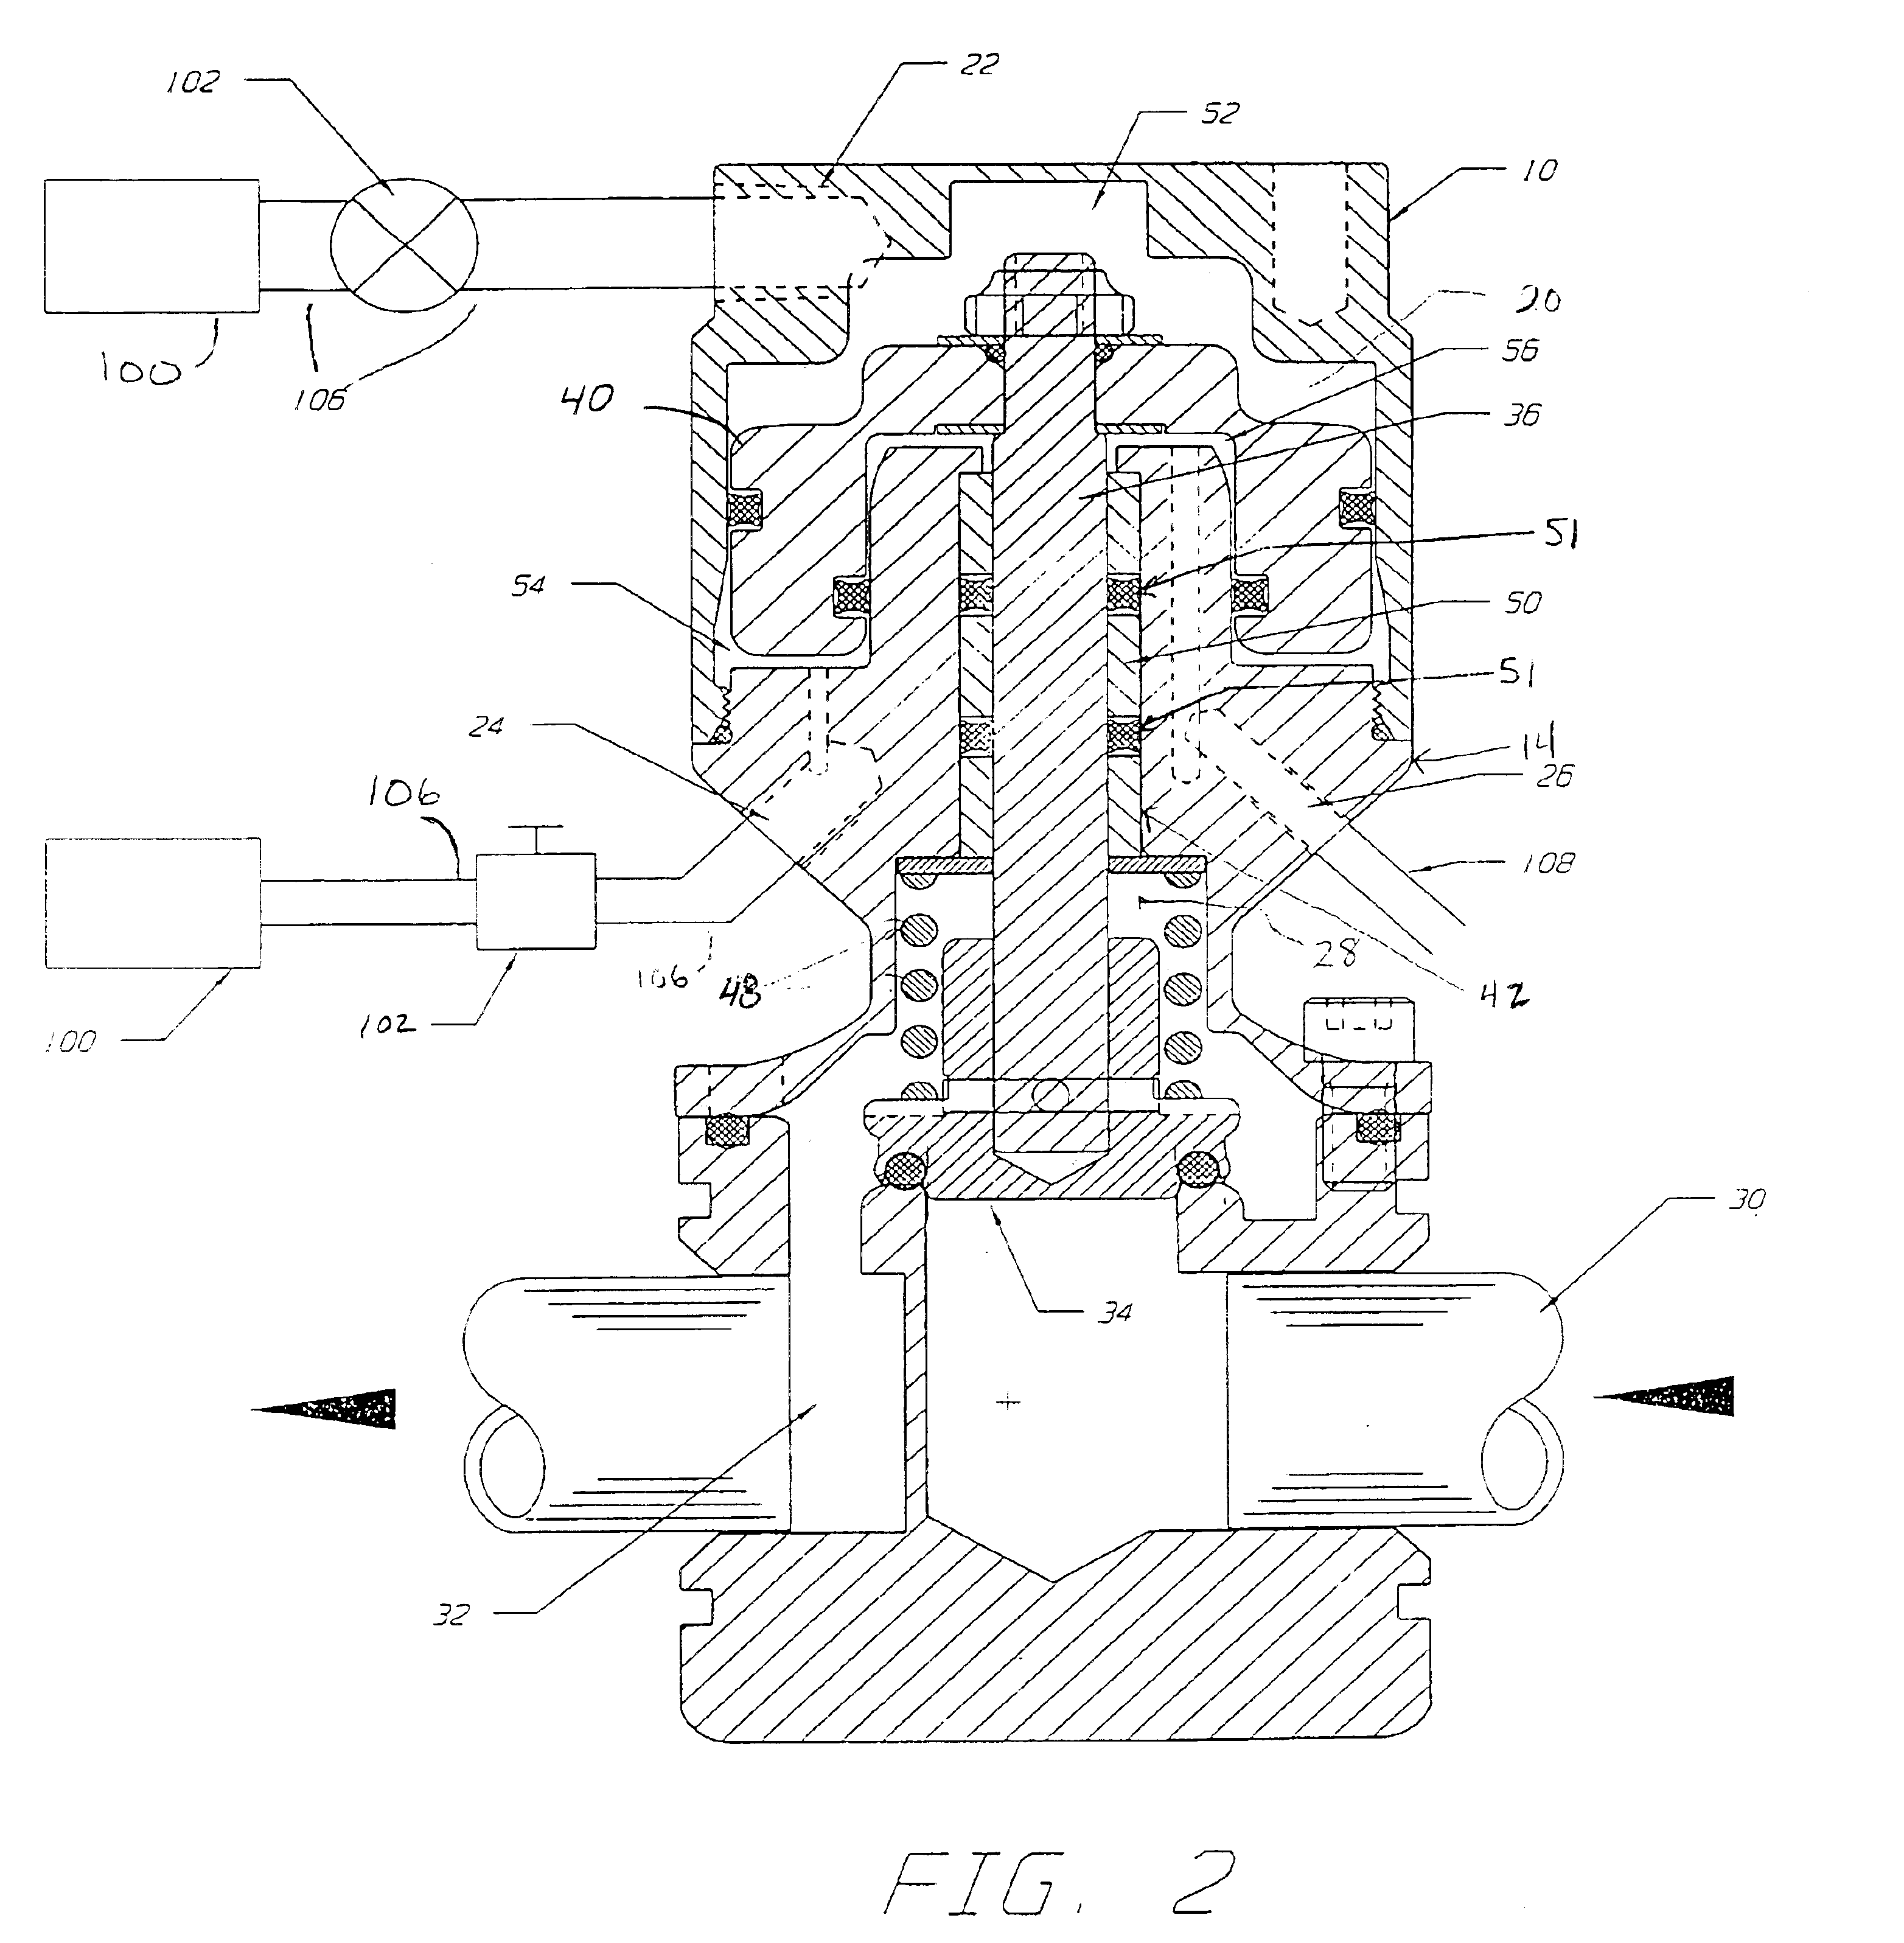 Flow control valve that may be used for mold temperature control systems